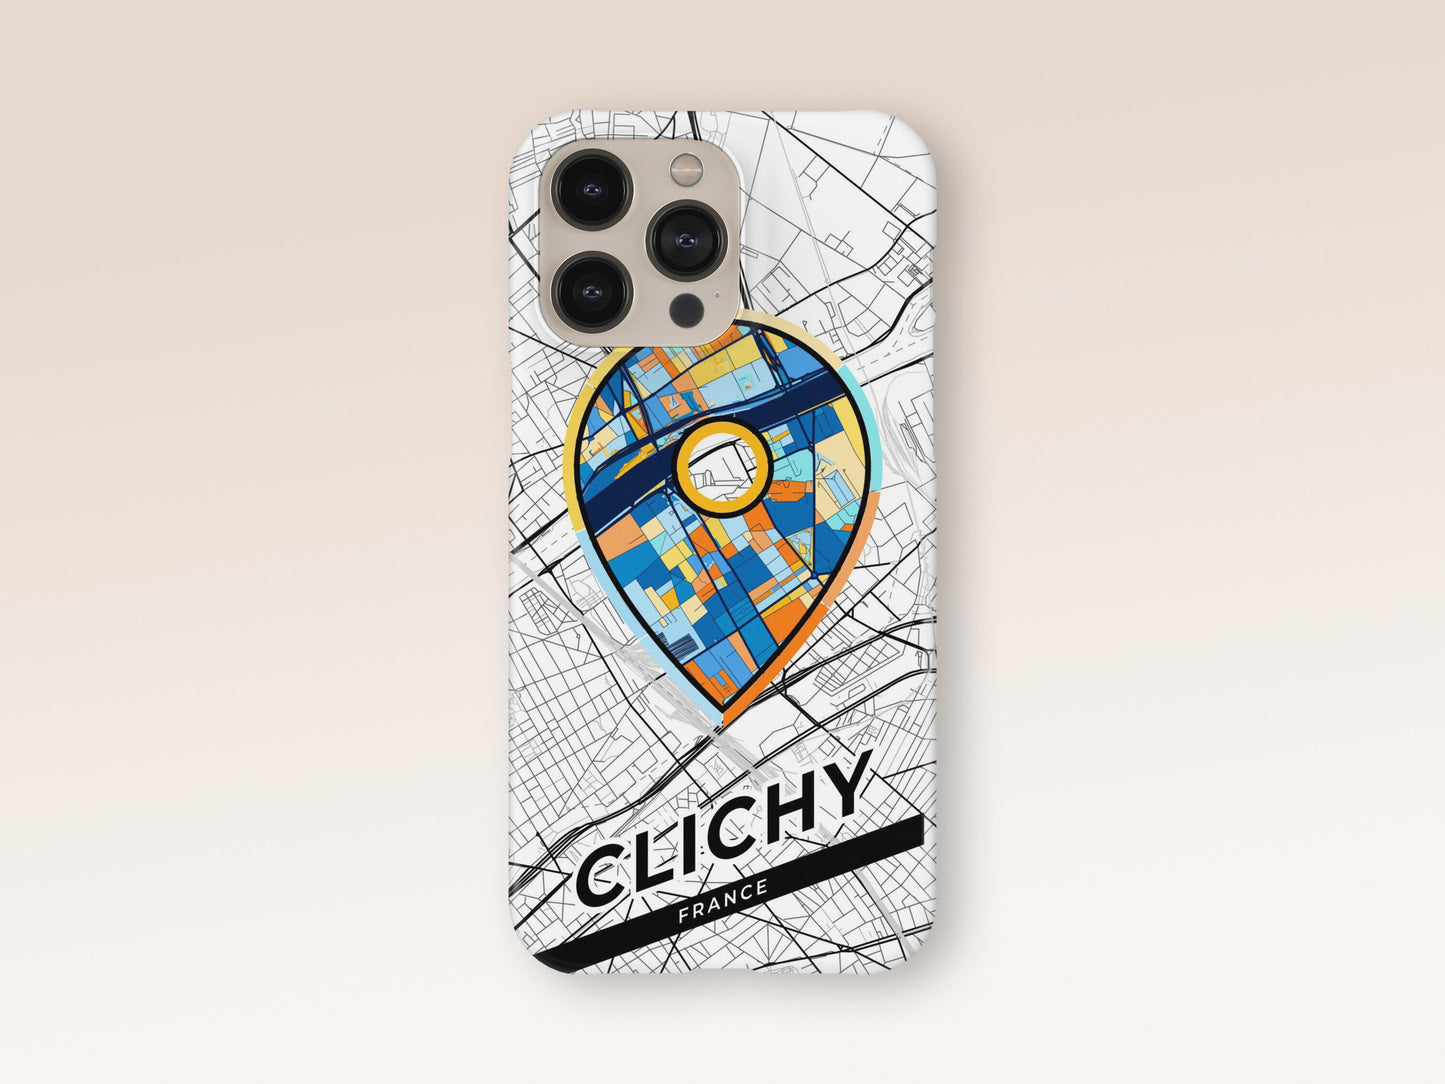 Clichy France slim phone case with colorful icon. Birthday, wedding or housewarming gift. Couple match cases. 1